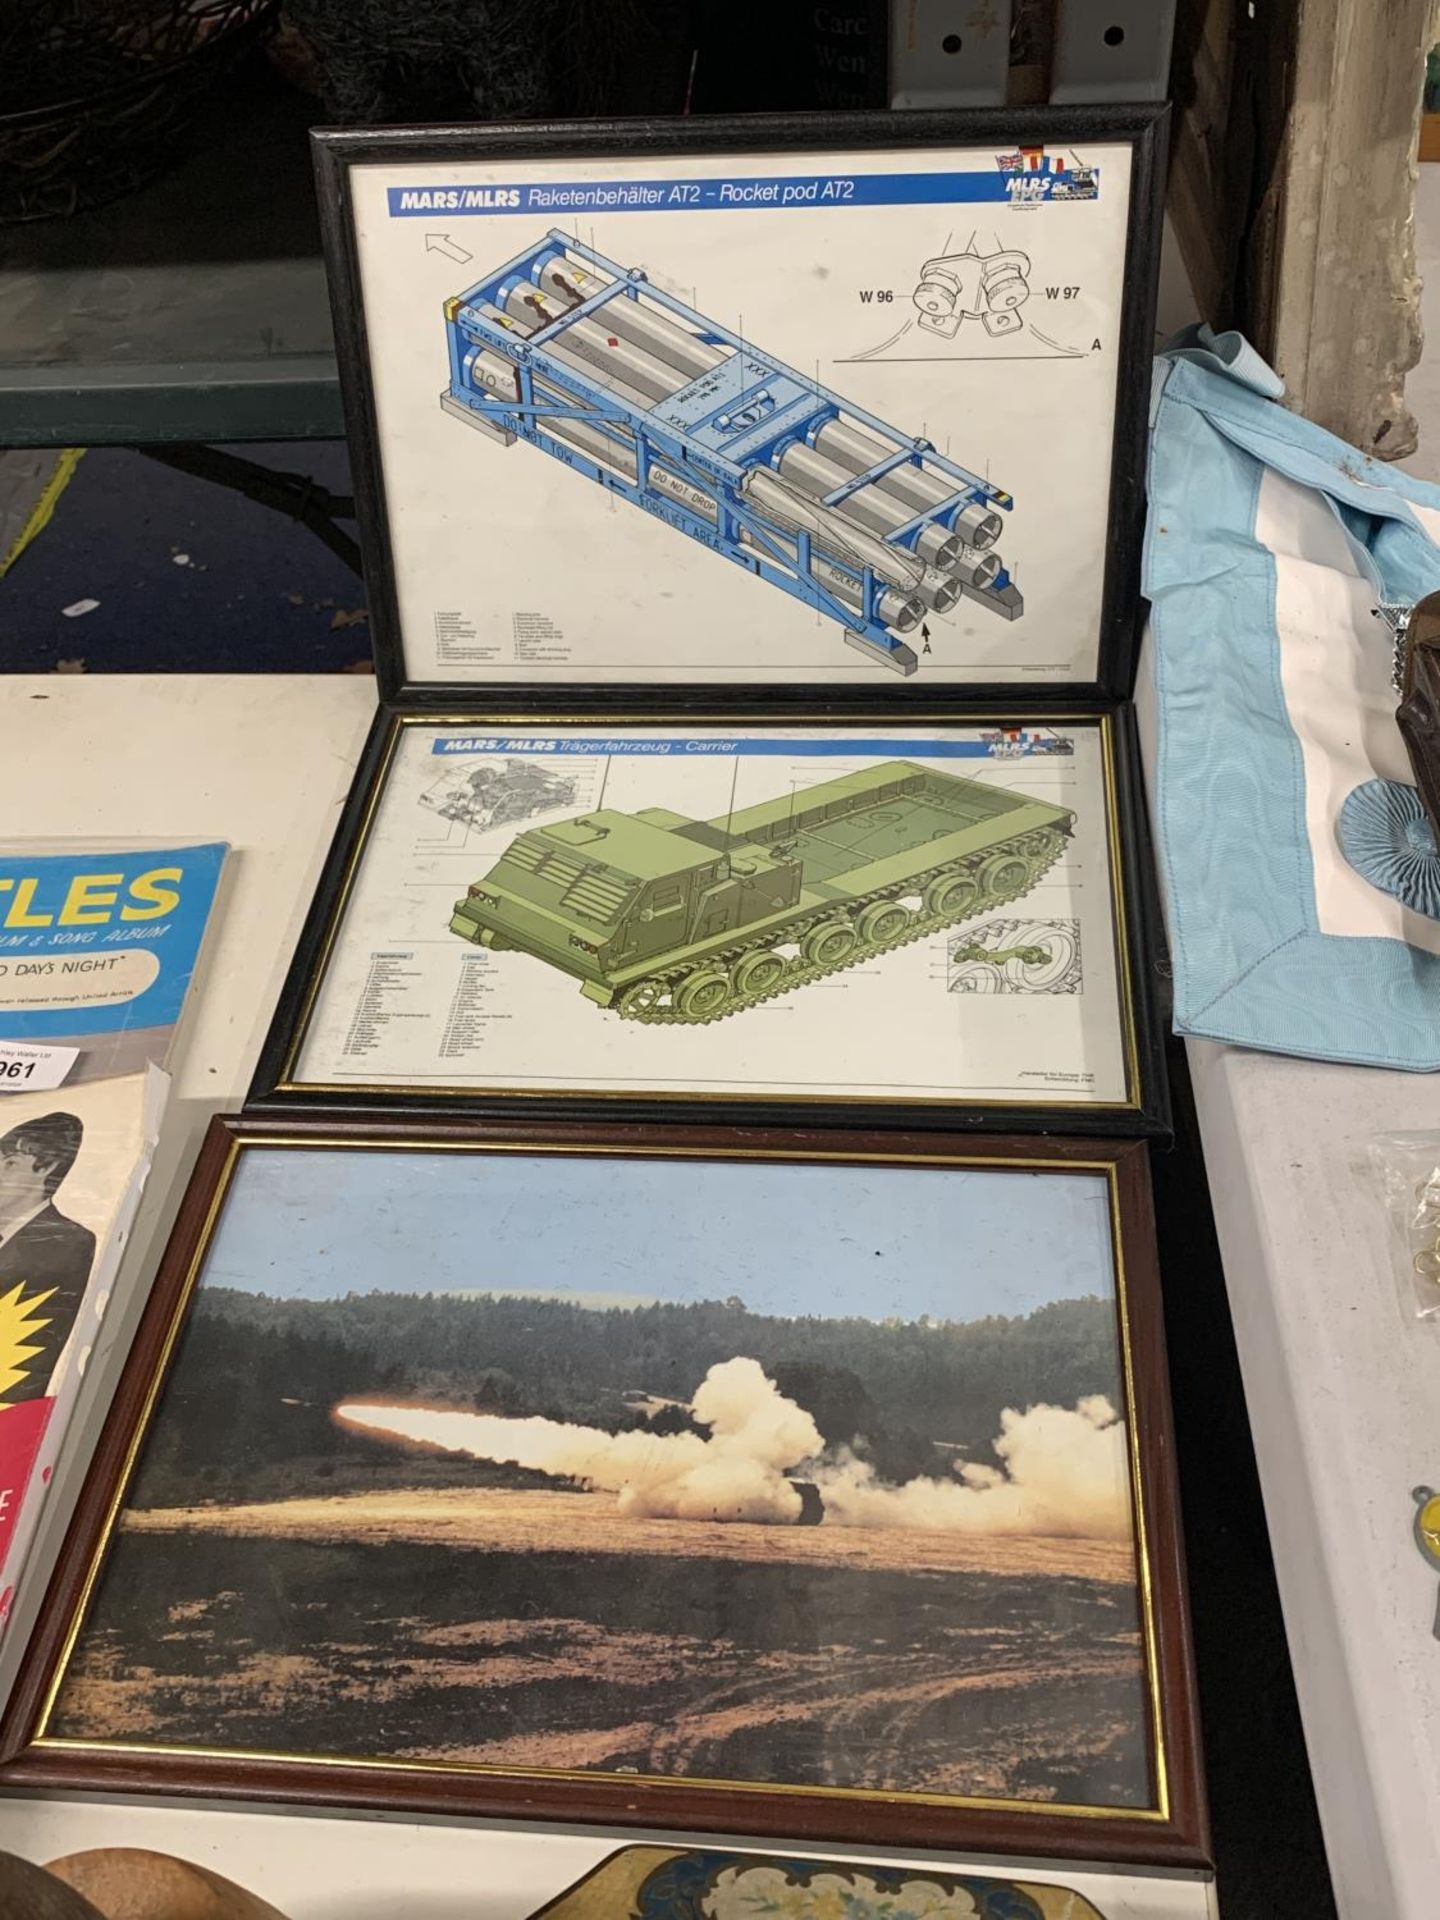 TWO FRAMED MILITARY PRINTS TO INCLUDE A ROCKET POD AT2 AND A CARRIER PLUS A PRINT OF A ROCKET